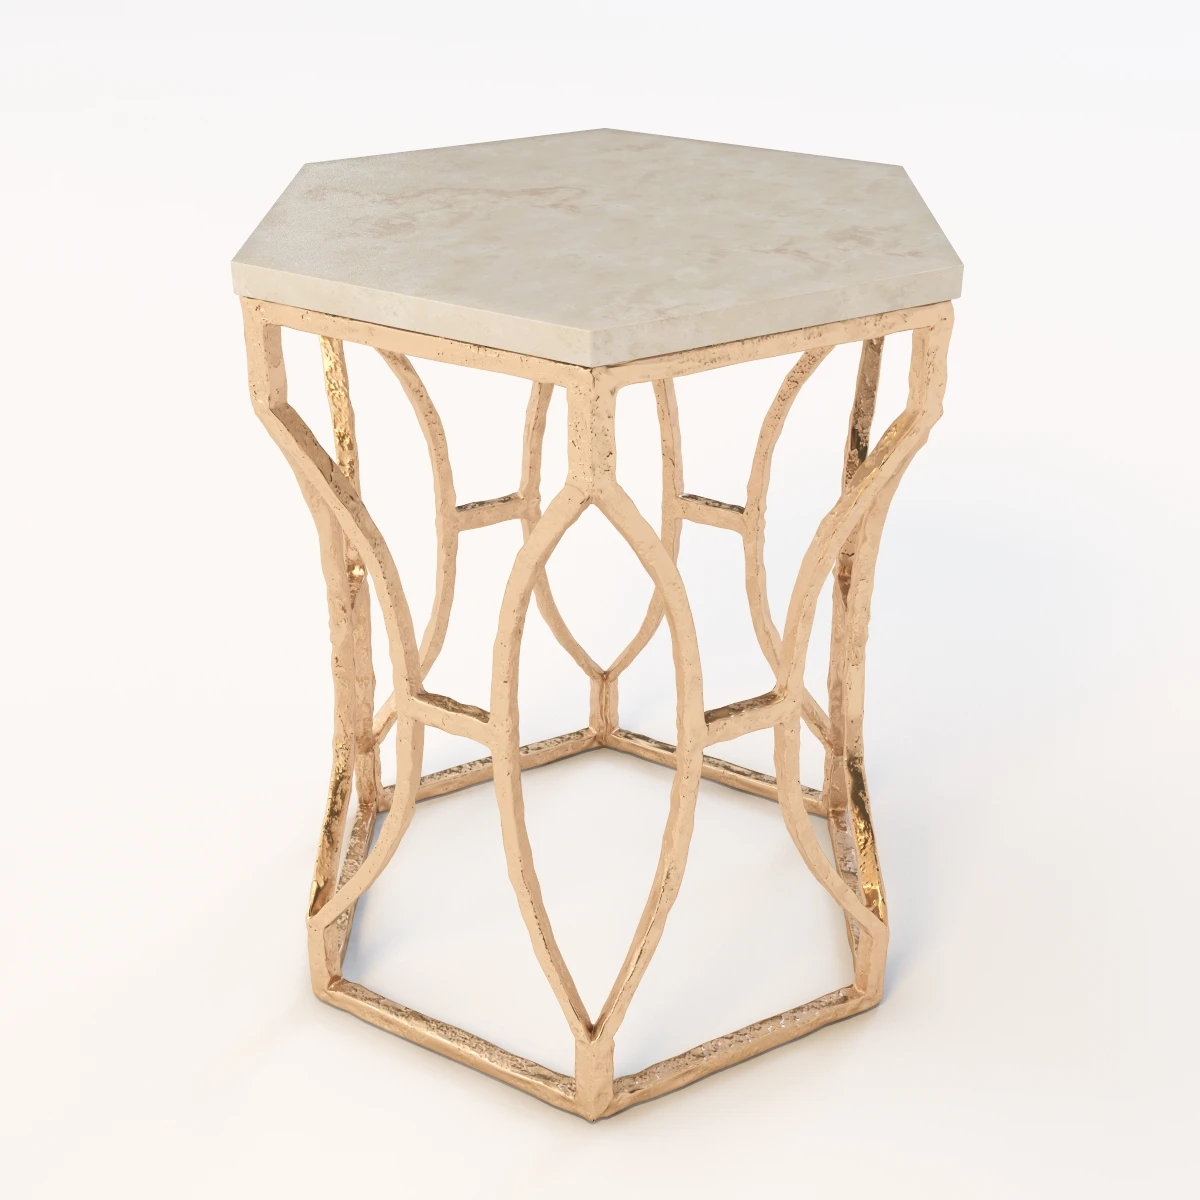 Roja Antique Gold Leaf Cream Marble Hexagonal Side Table 3D Model_03